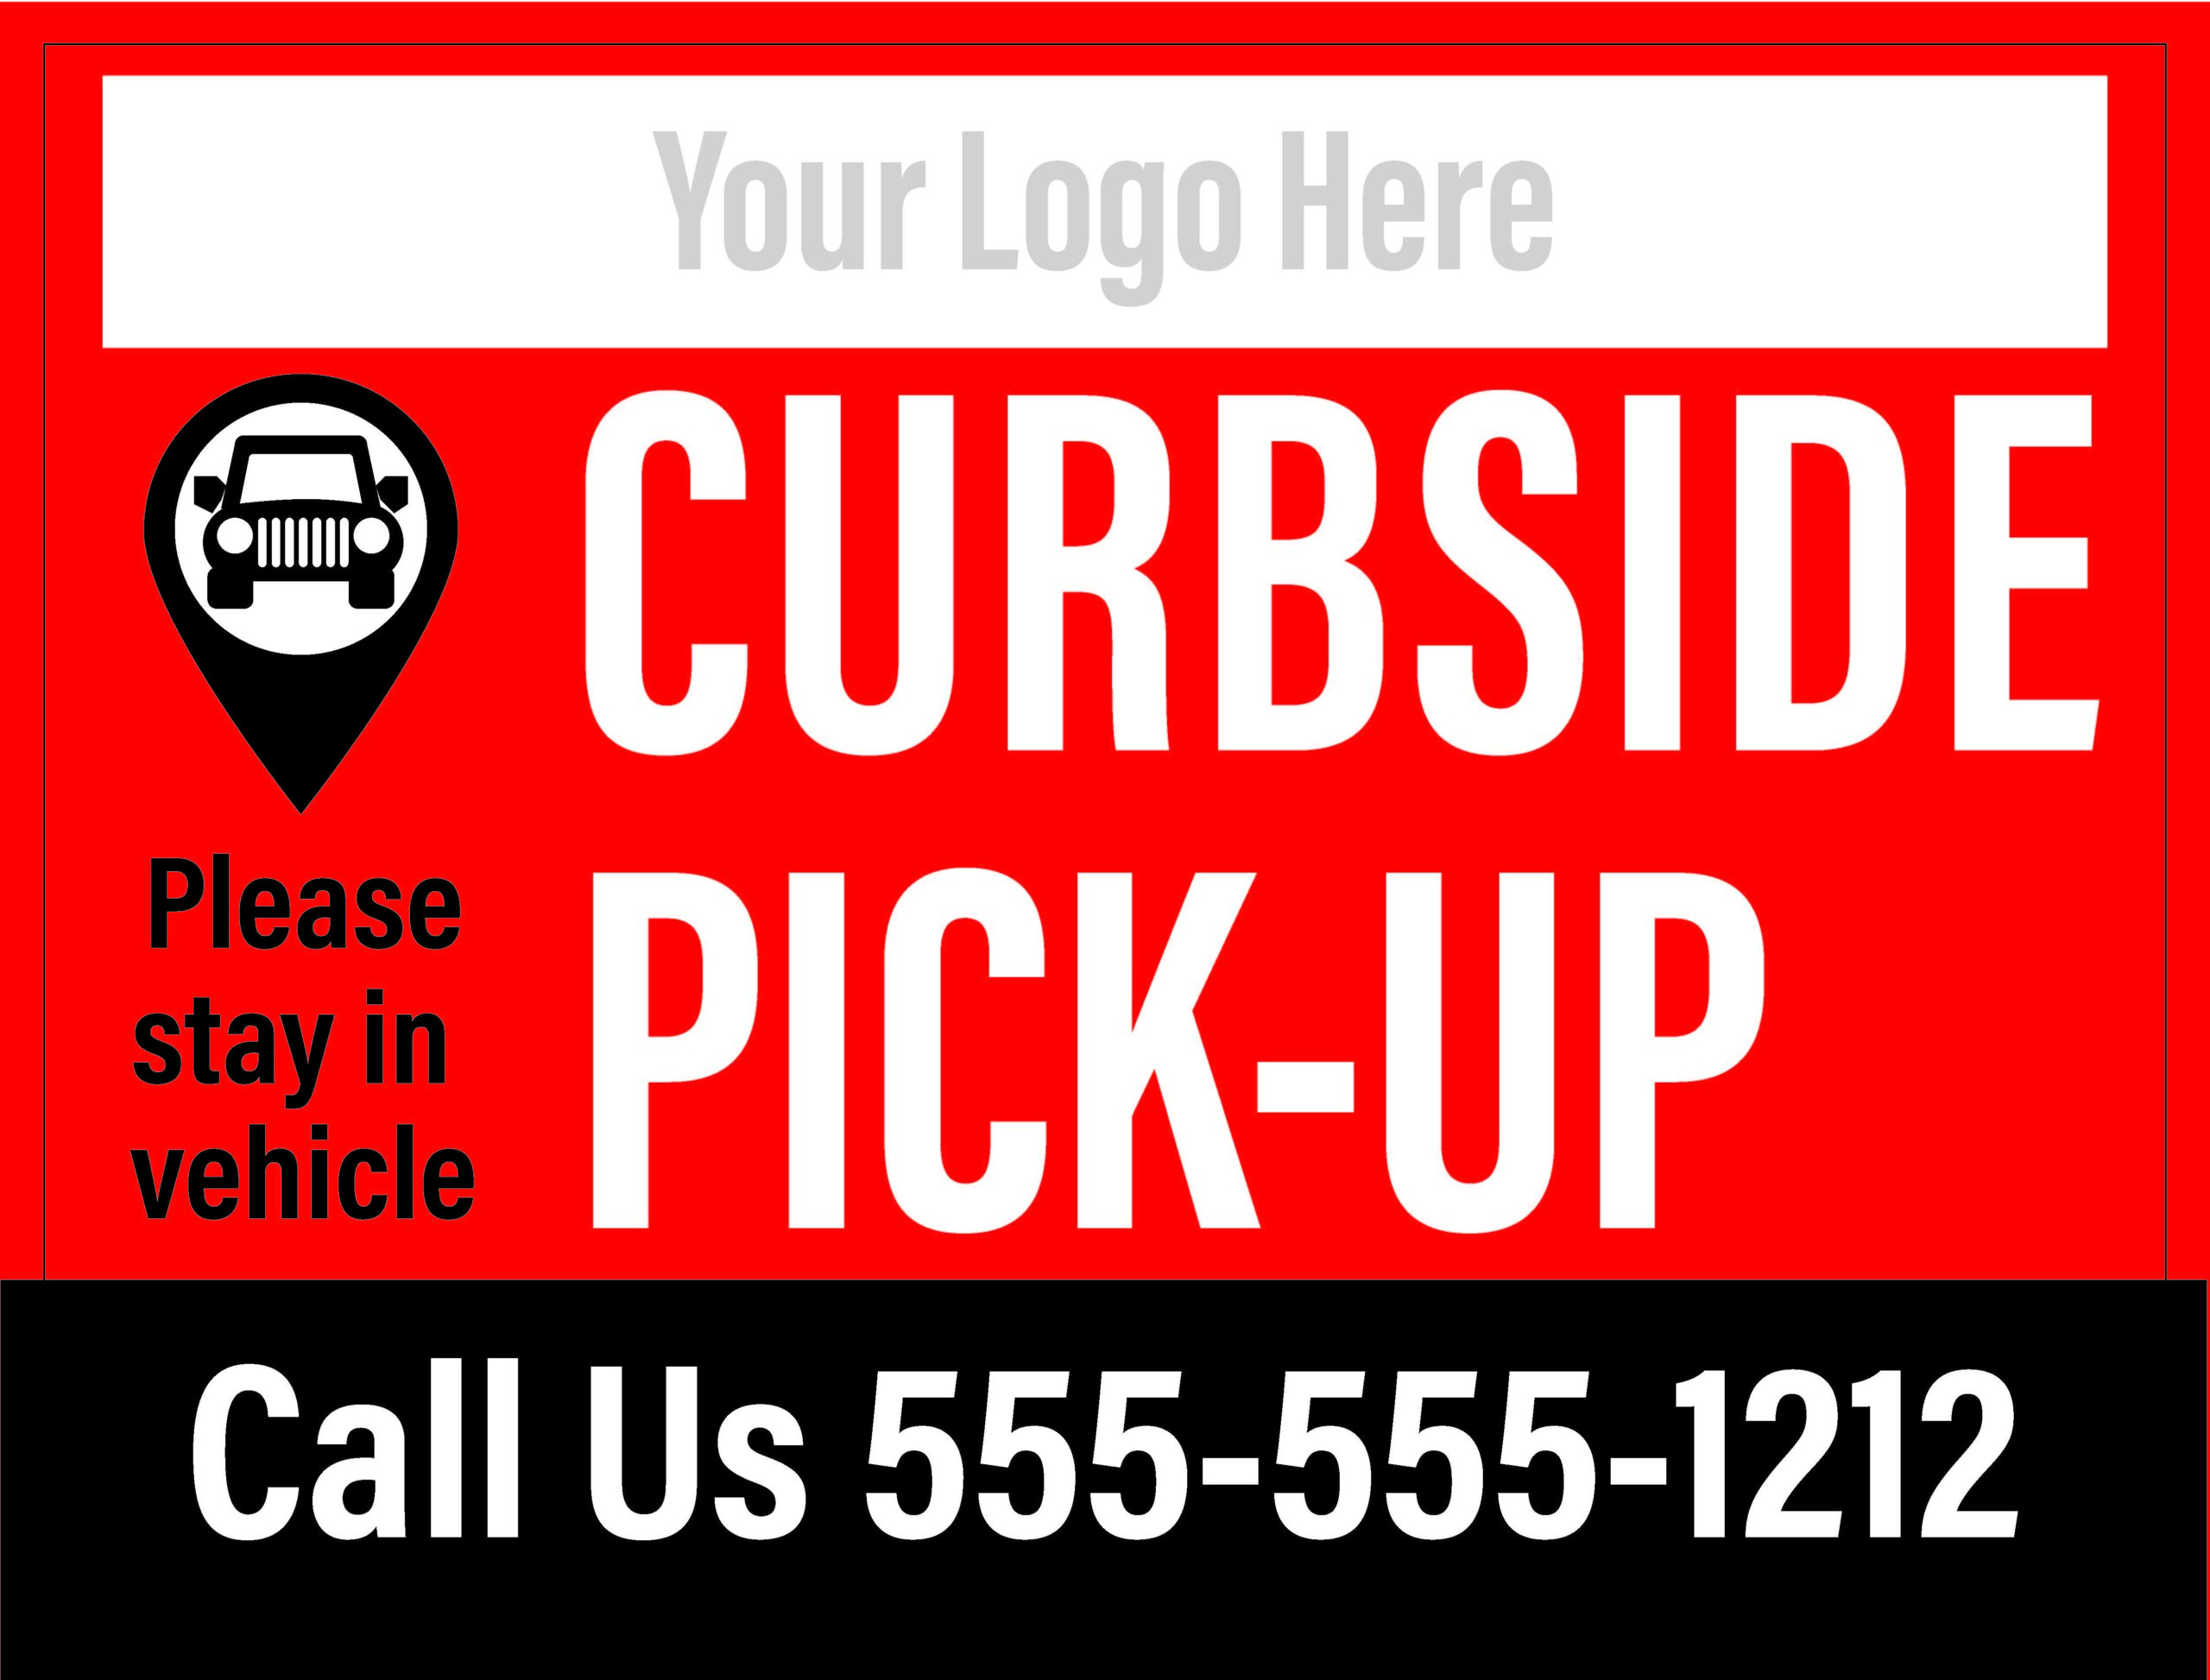 Curbside Pickup Signs24”x 18”, printed on White Coroplast (outside)